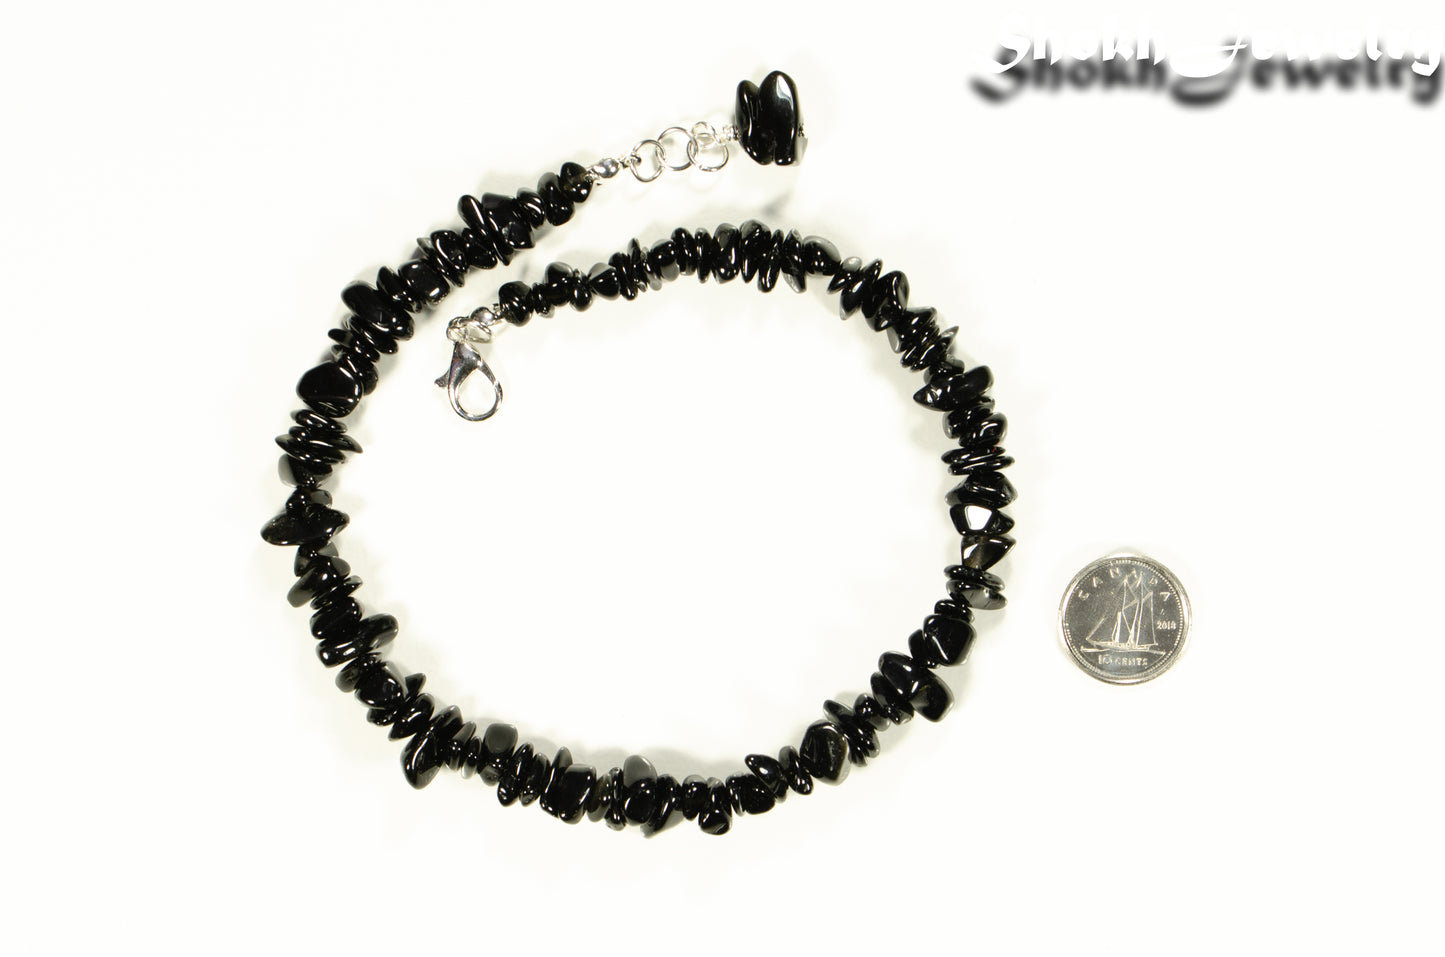 Natural Black Obsidian Crystal Chip Choker Necklace beside a dime.